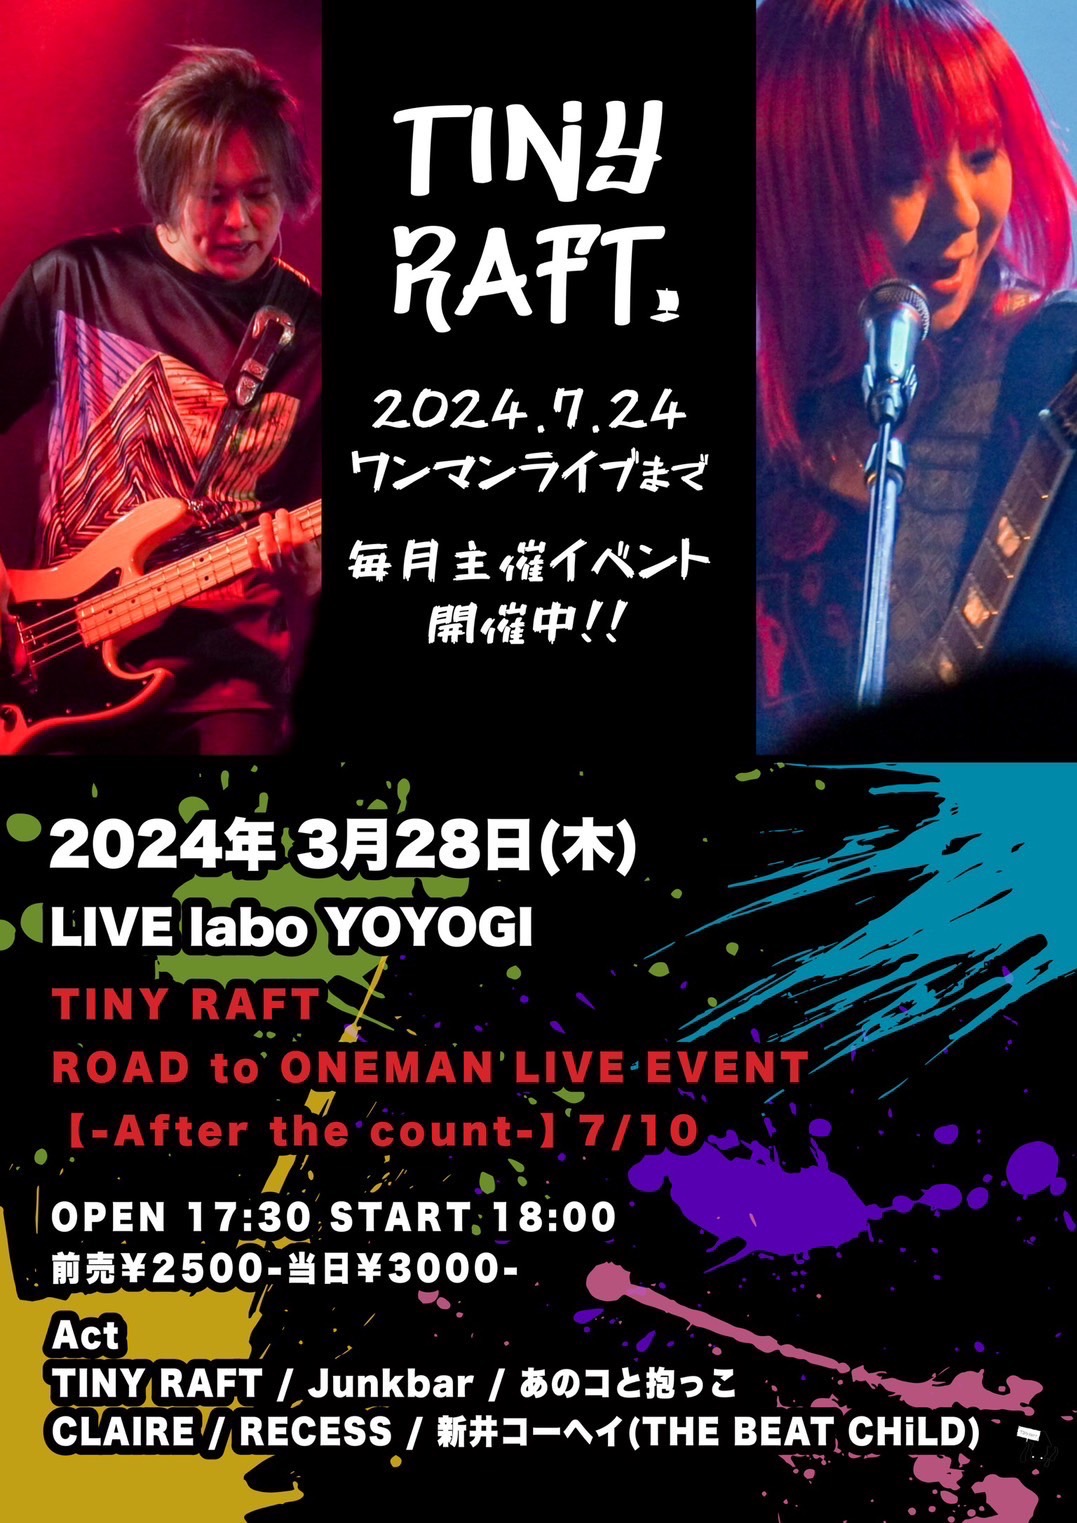 TINY RAFT ROAD TO ONEMAN LIVE EVENT
【After the count】7/10